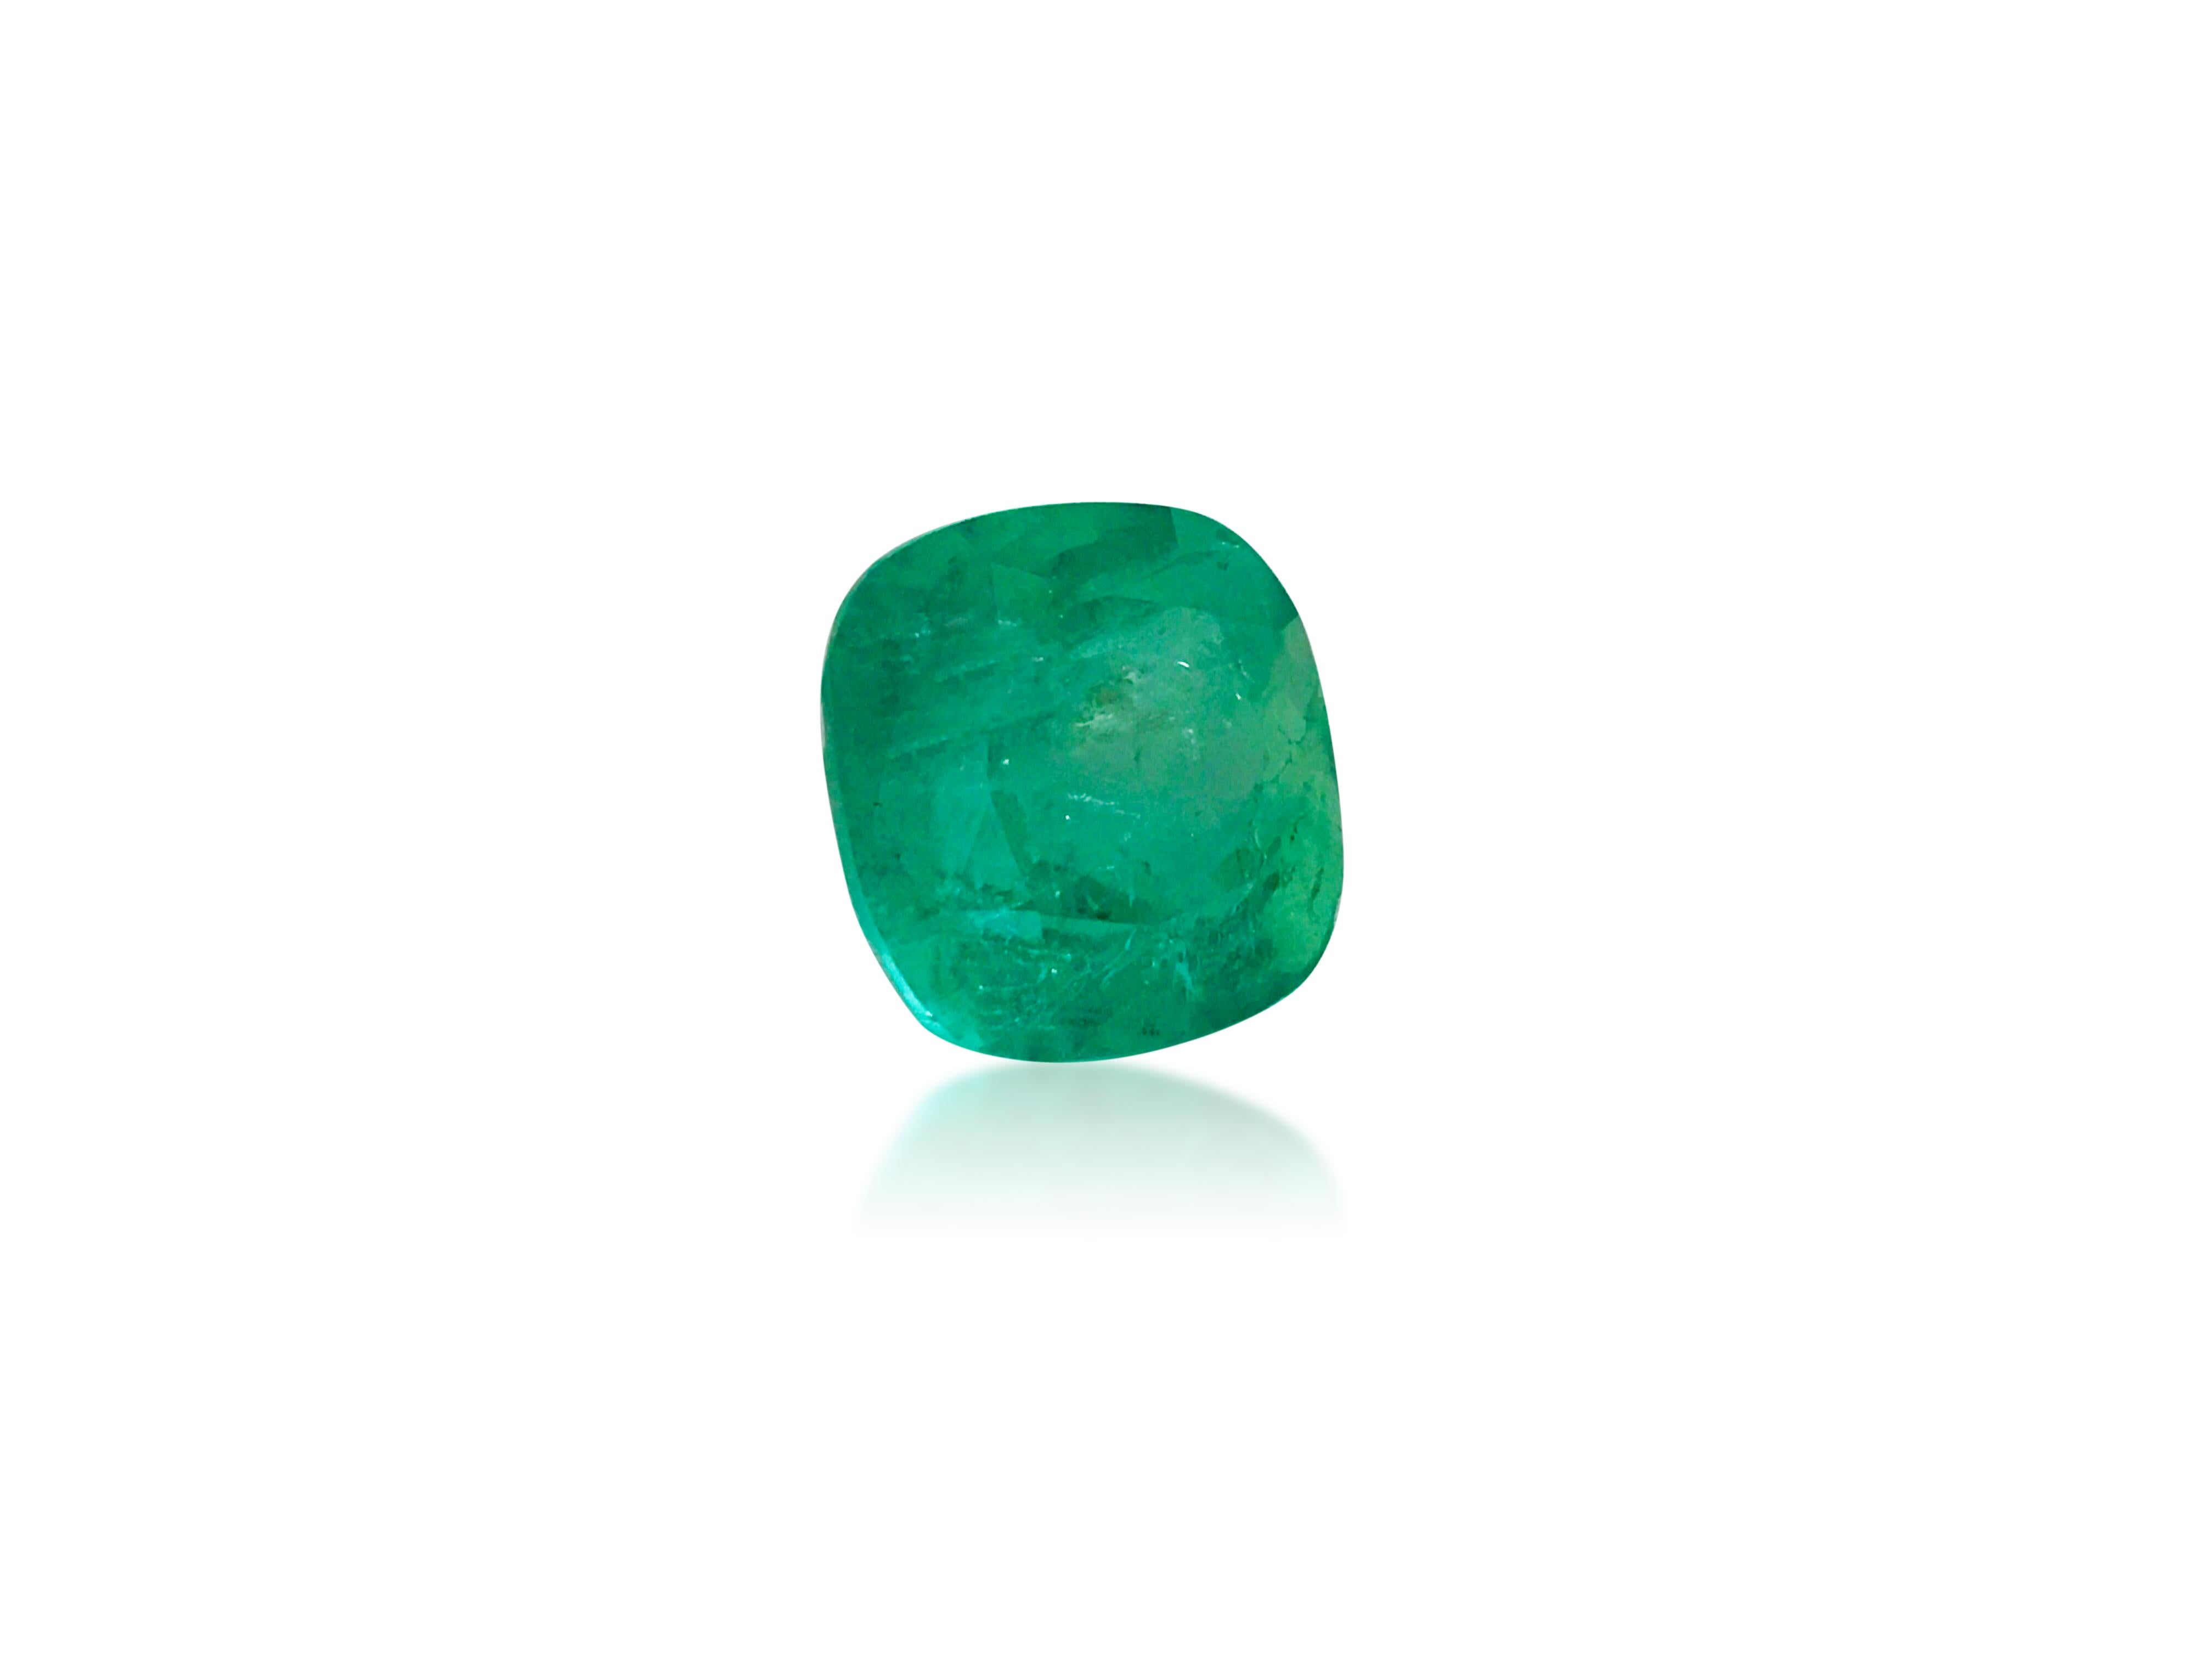 This superb loose emerald boasts a remarkable 19.60 carats and features a stunning cushion cut, measuring 6.20 x 5.80 mm. With its deep color and intense green hue, this natural earth-mined emerald exhibits vivid saturation and exceptional shine.